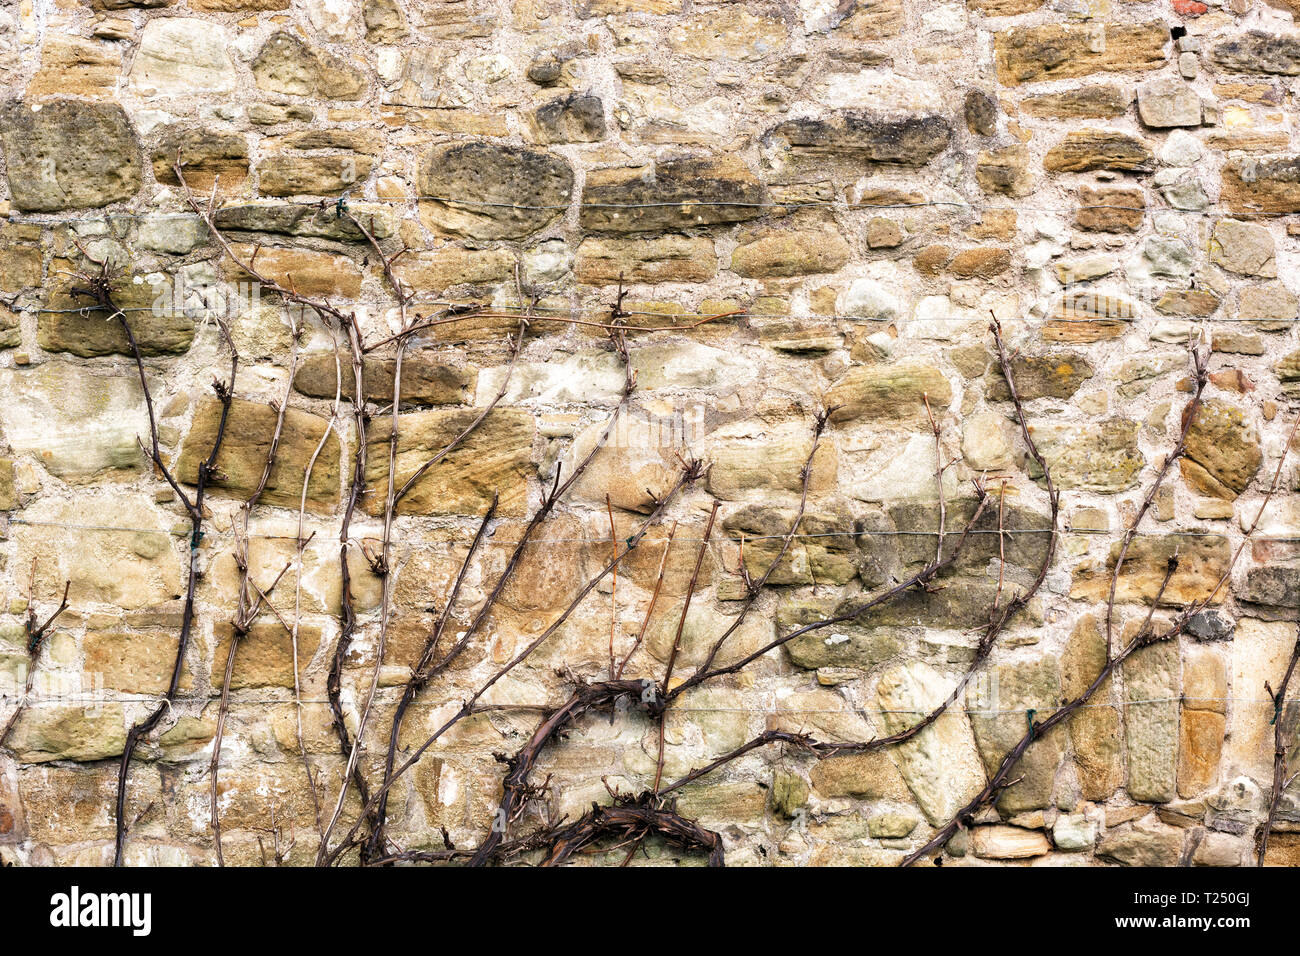 Stone wall of an old building with a dry clambering plant Stock Photo